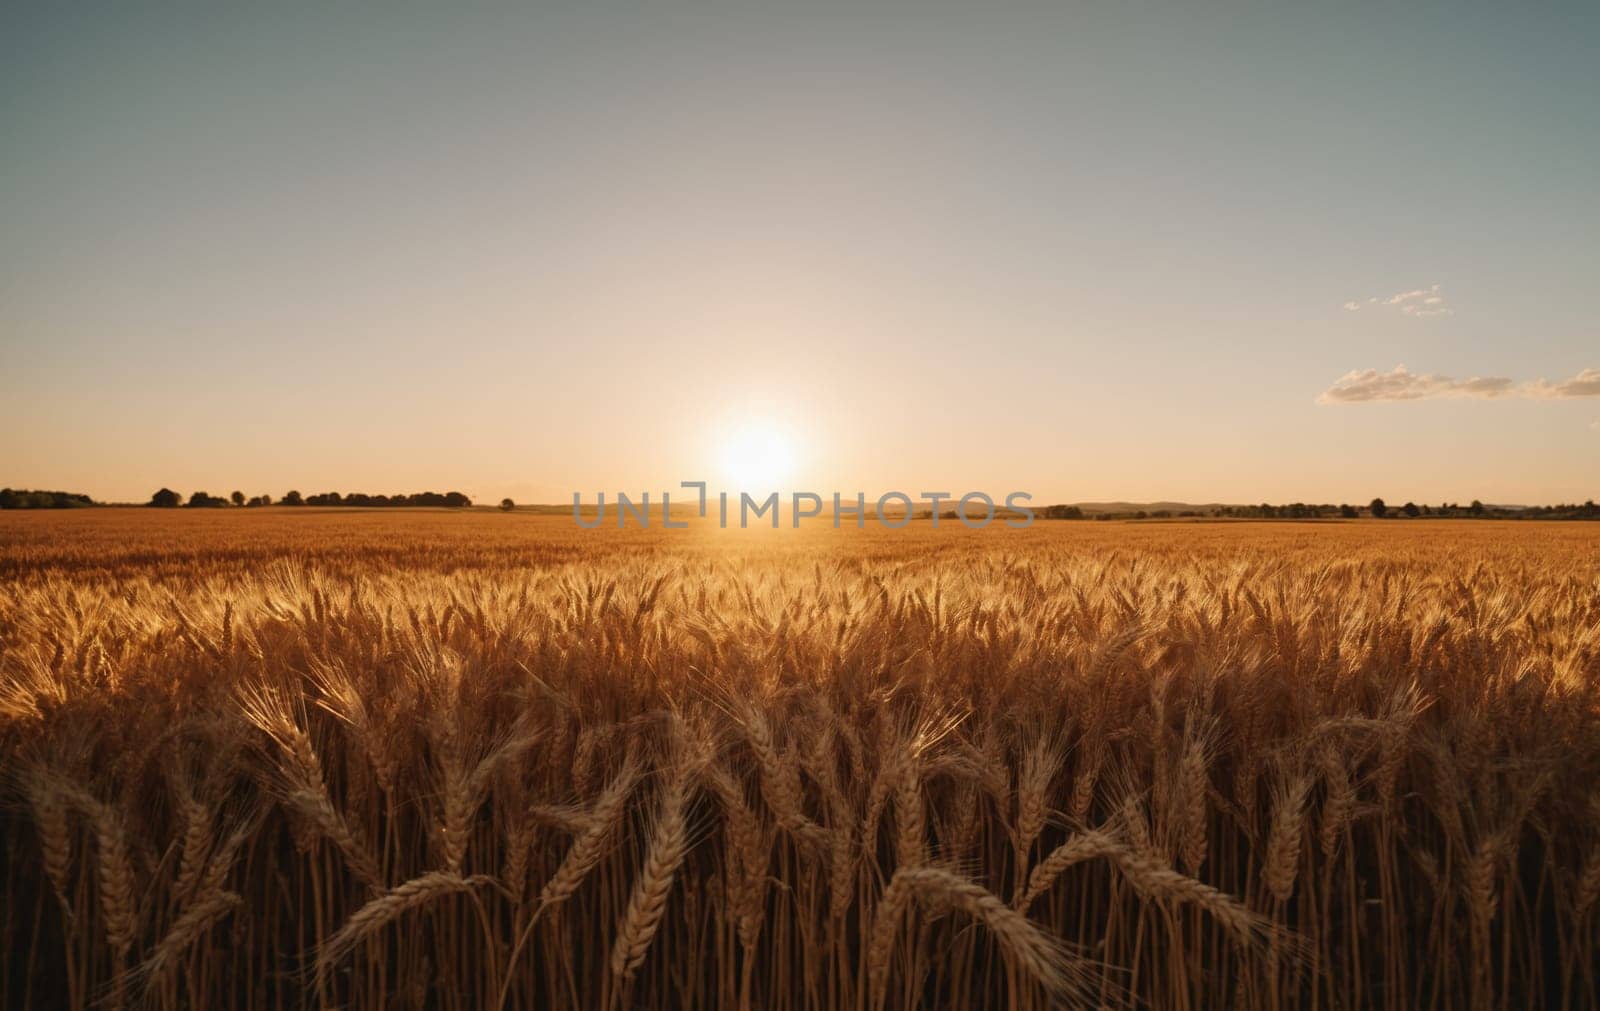 Wheat field at sunset. Beautiful Nature Sunset Landscape. Rural Scenery under Shining Sunlight. by Andre1ns